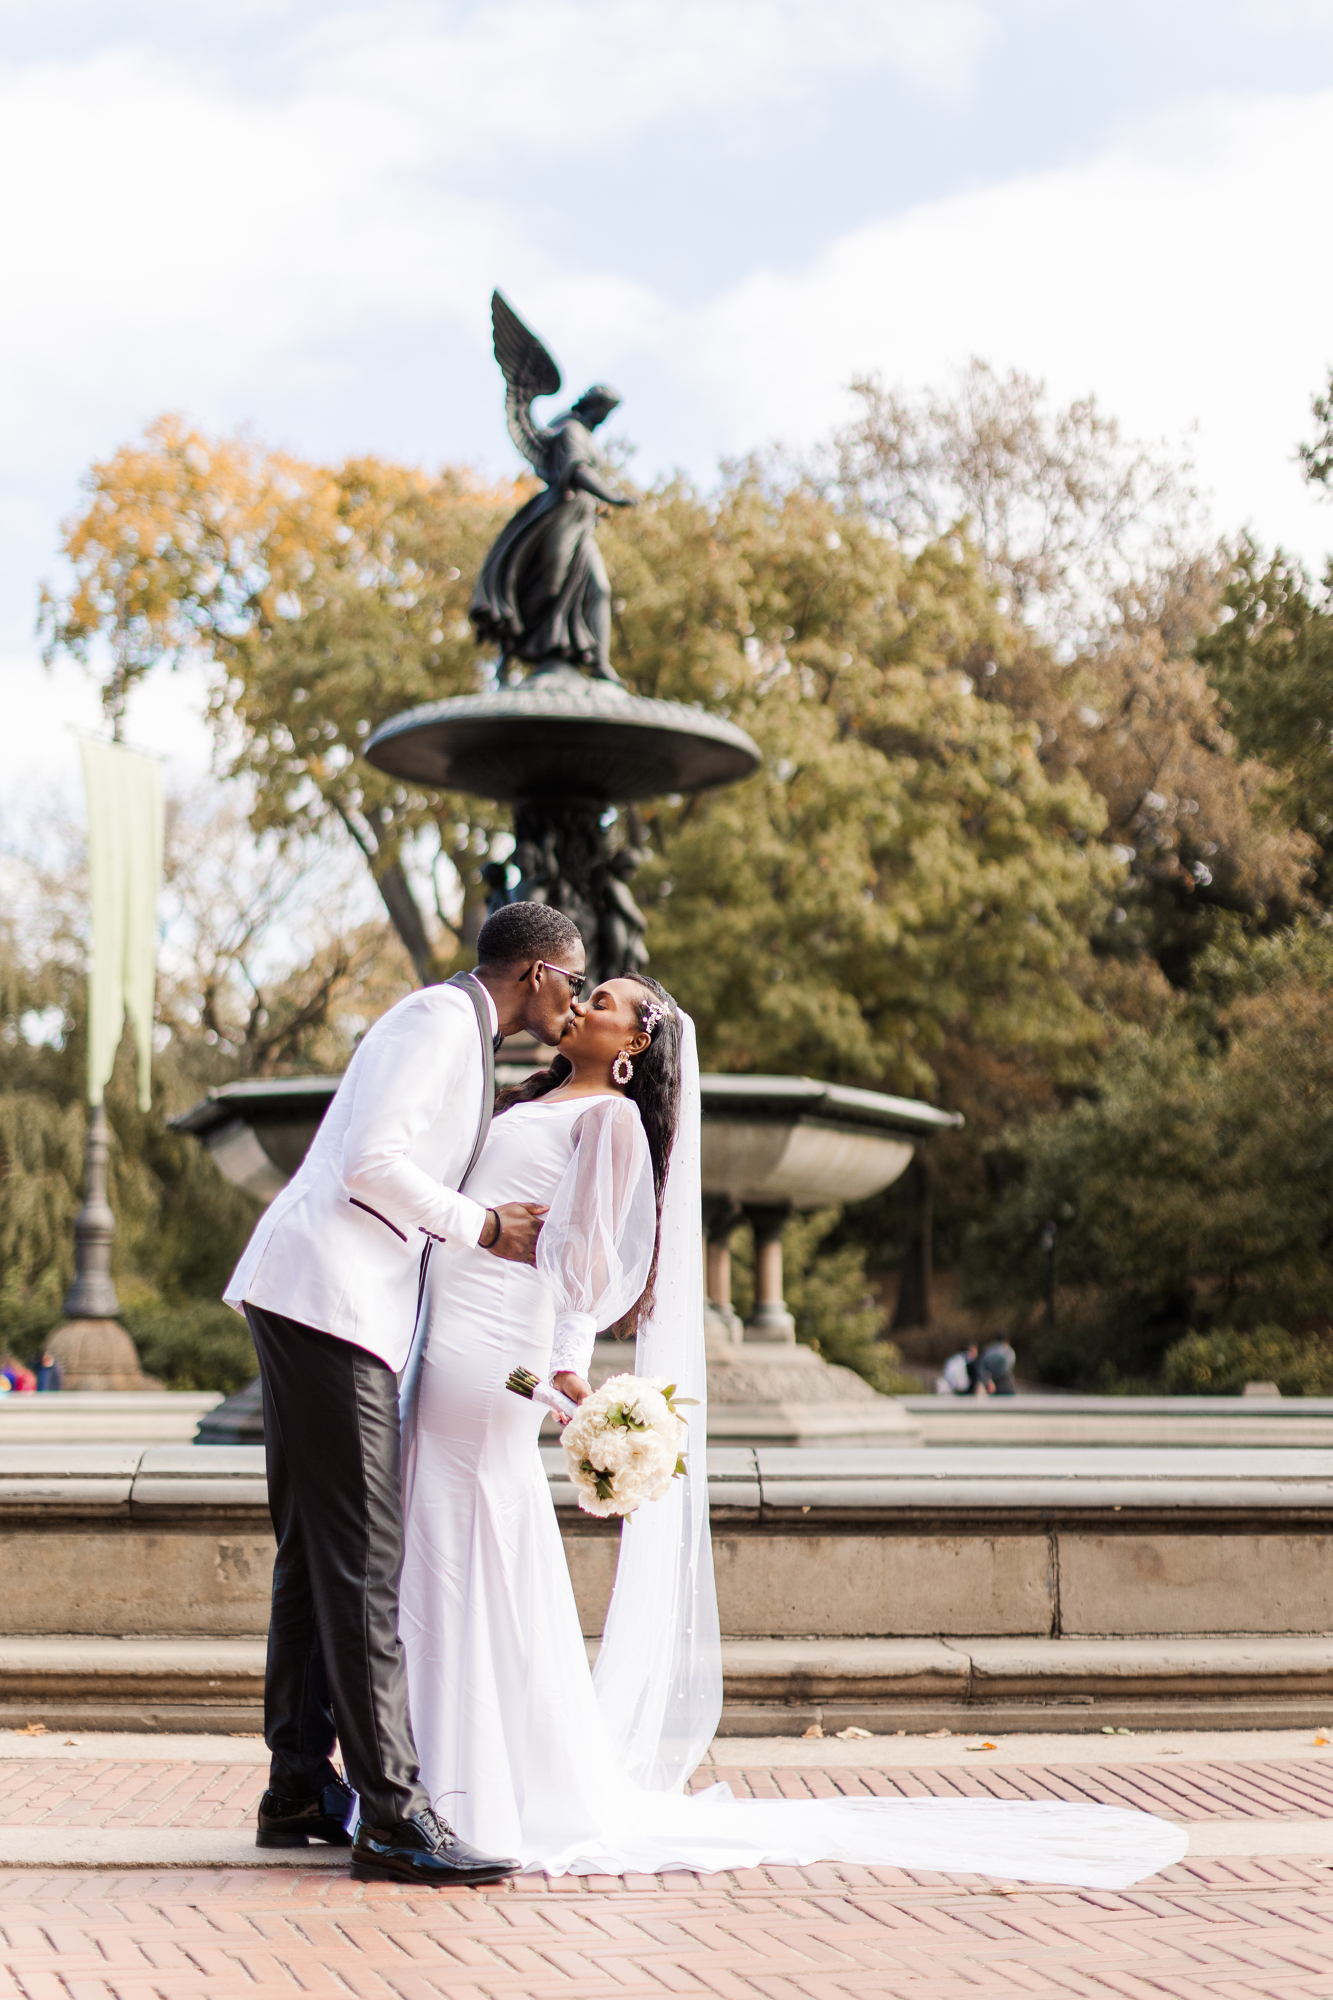 Iconic Central Park Wedding Photos on Cherry Hill in Fall